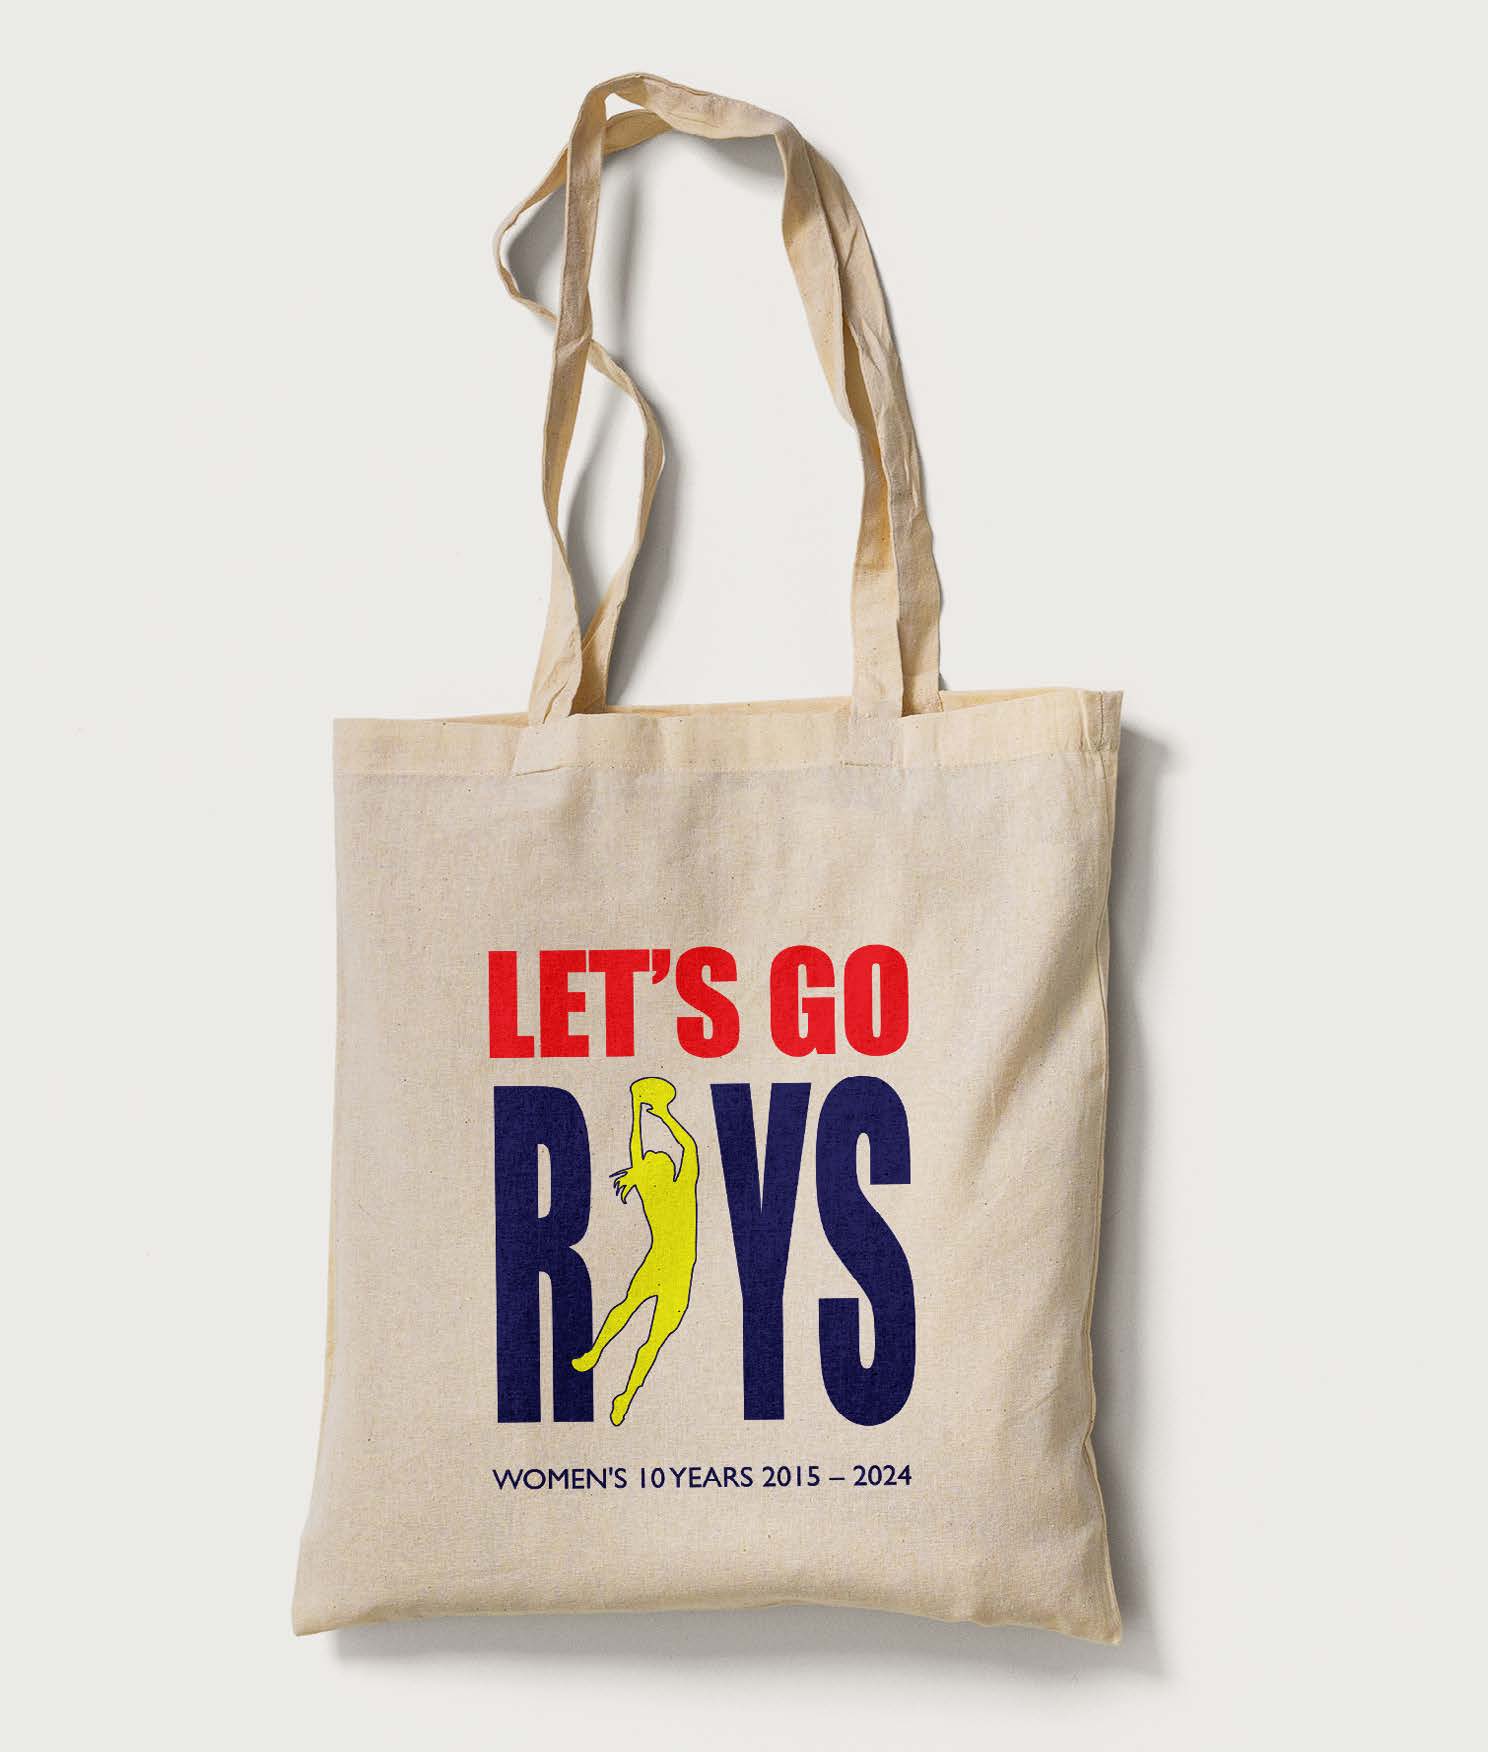 Fitzroy Women's 10th Anniversary Tote Bags